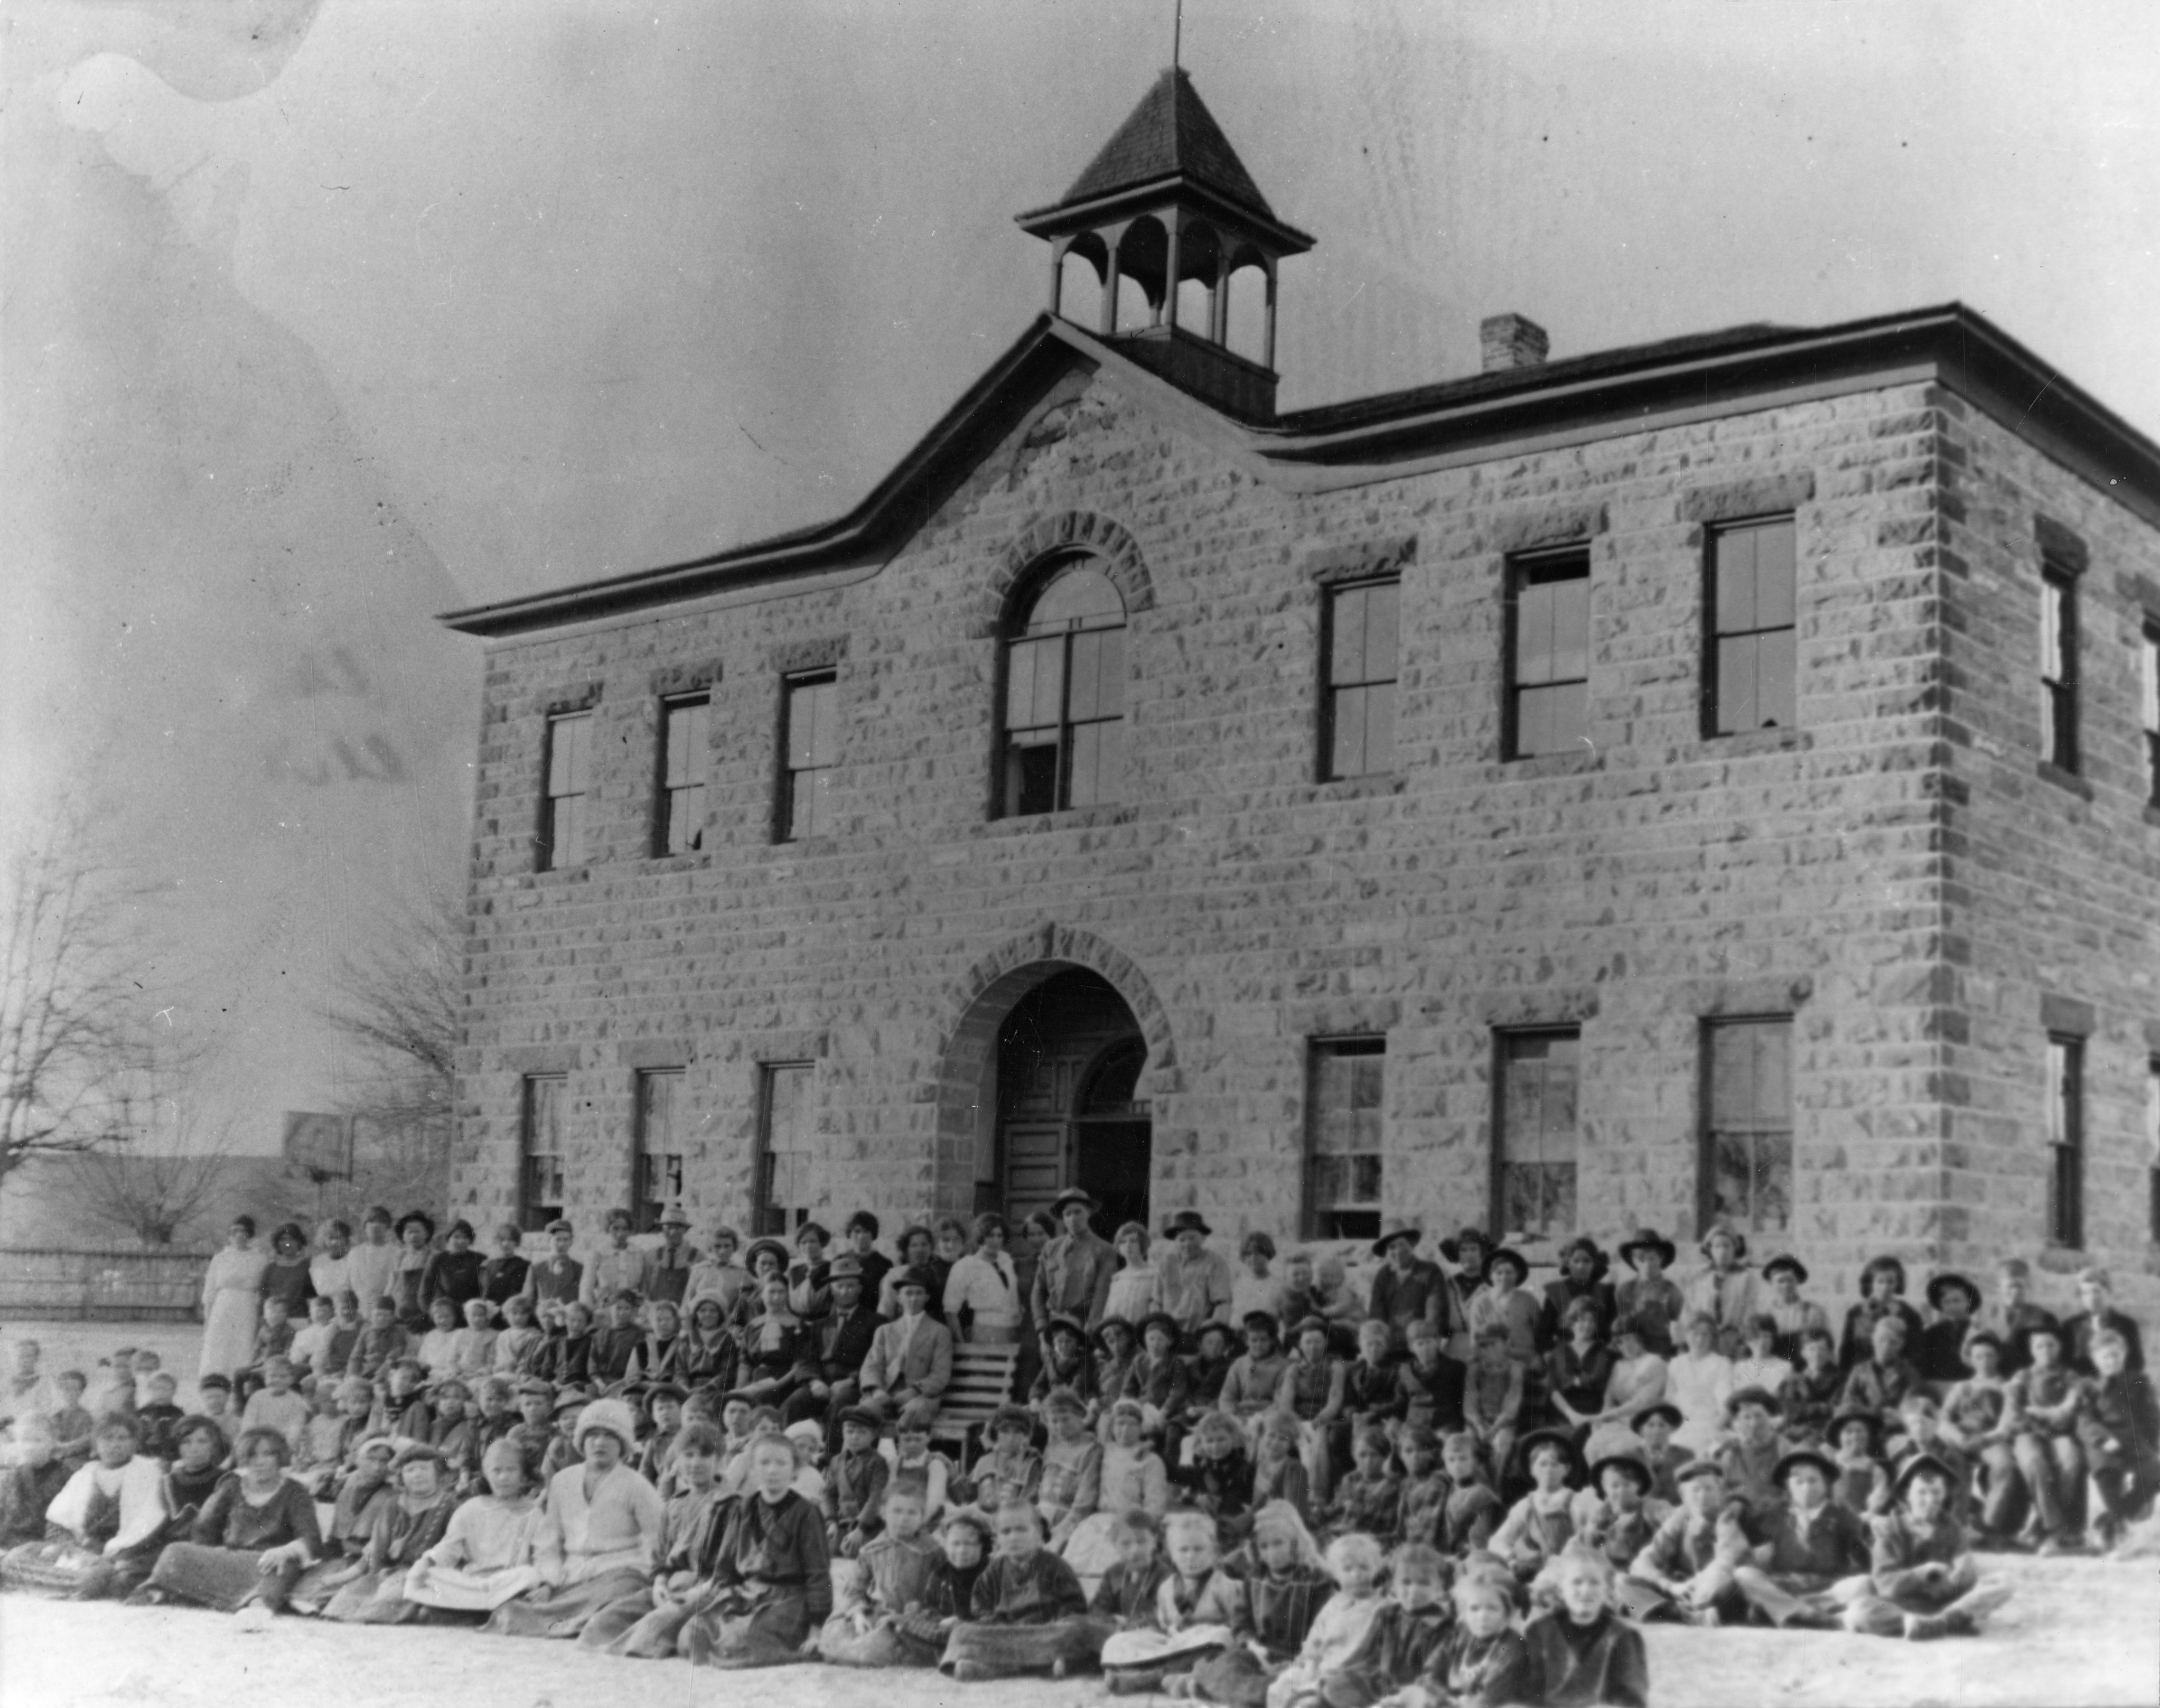 A large group of people in front of the old Washington School